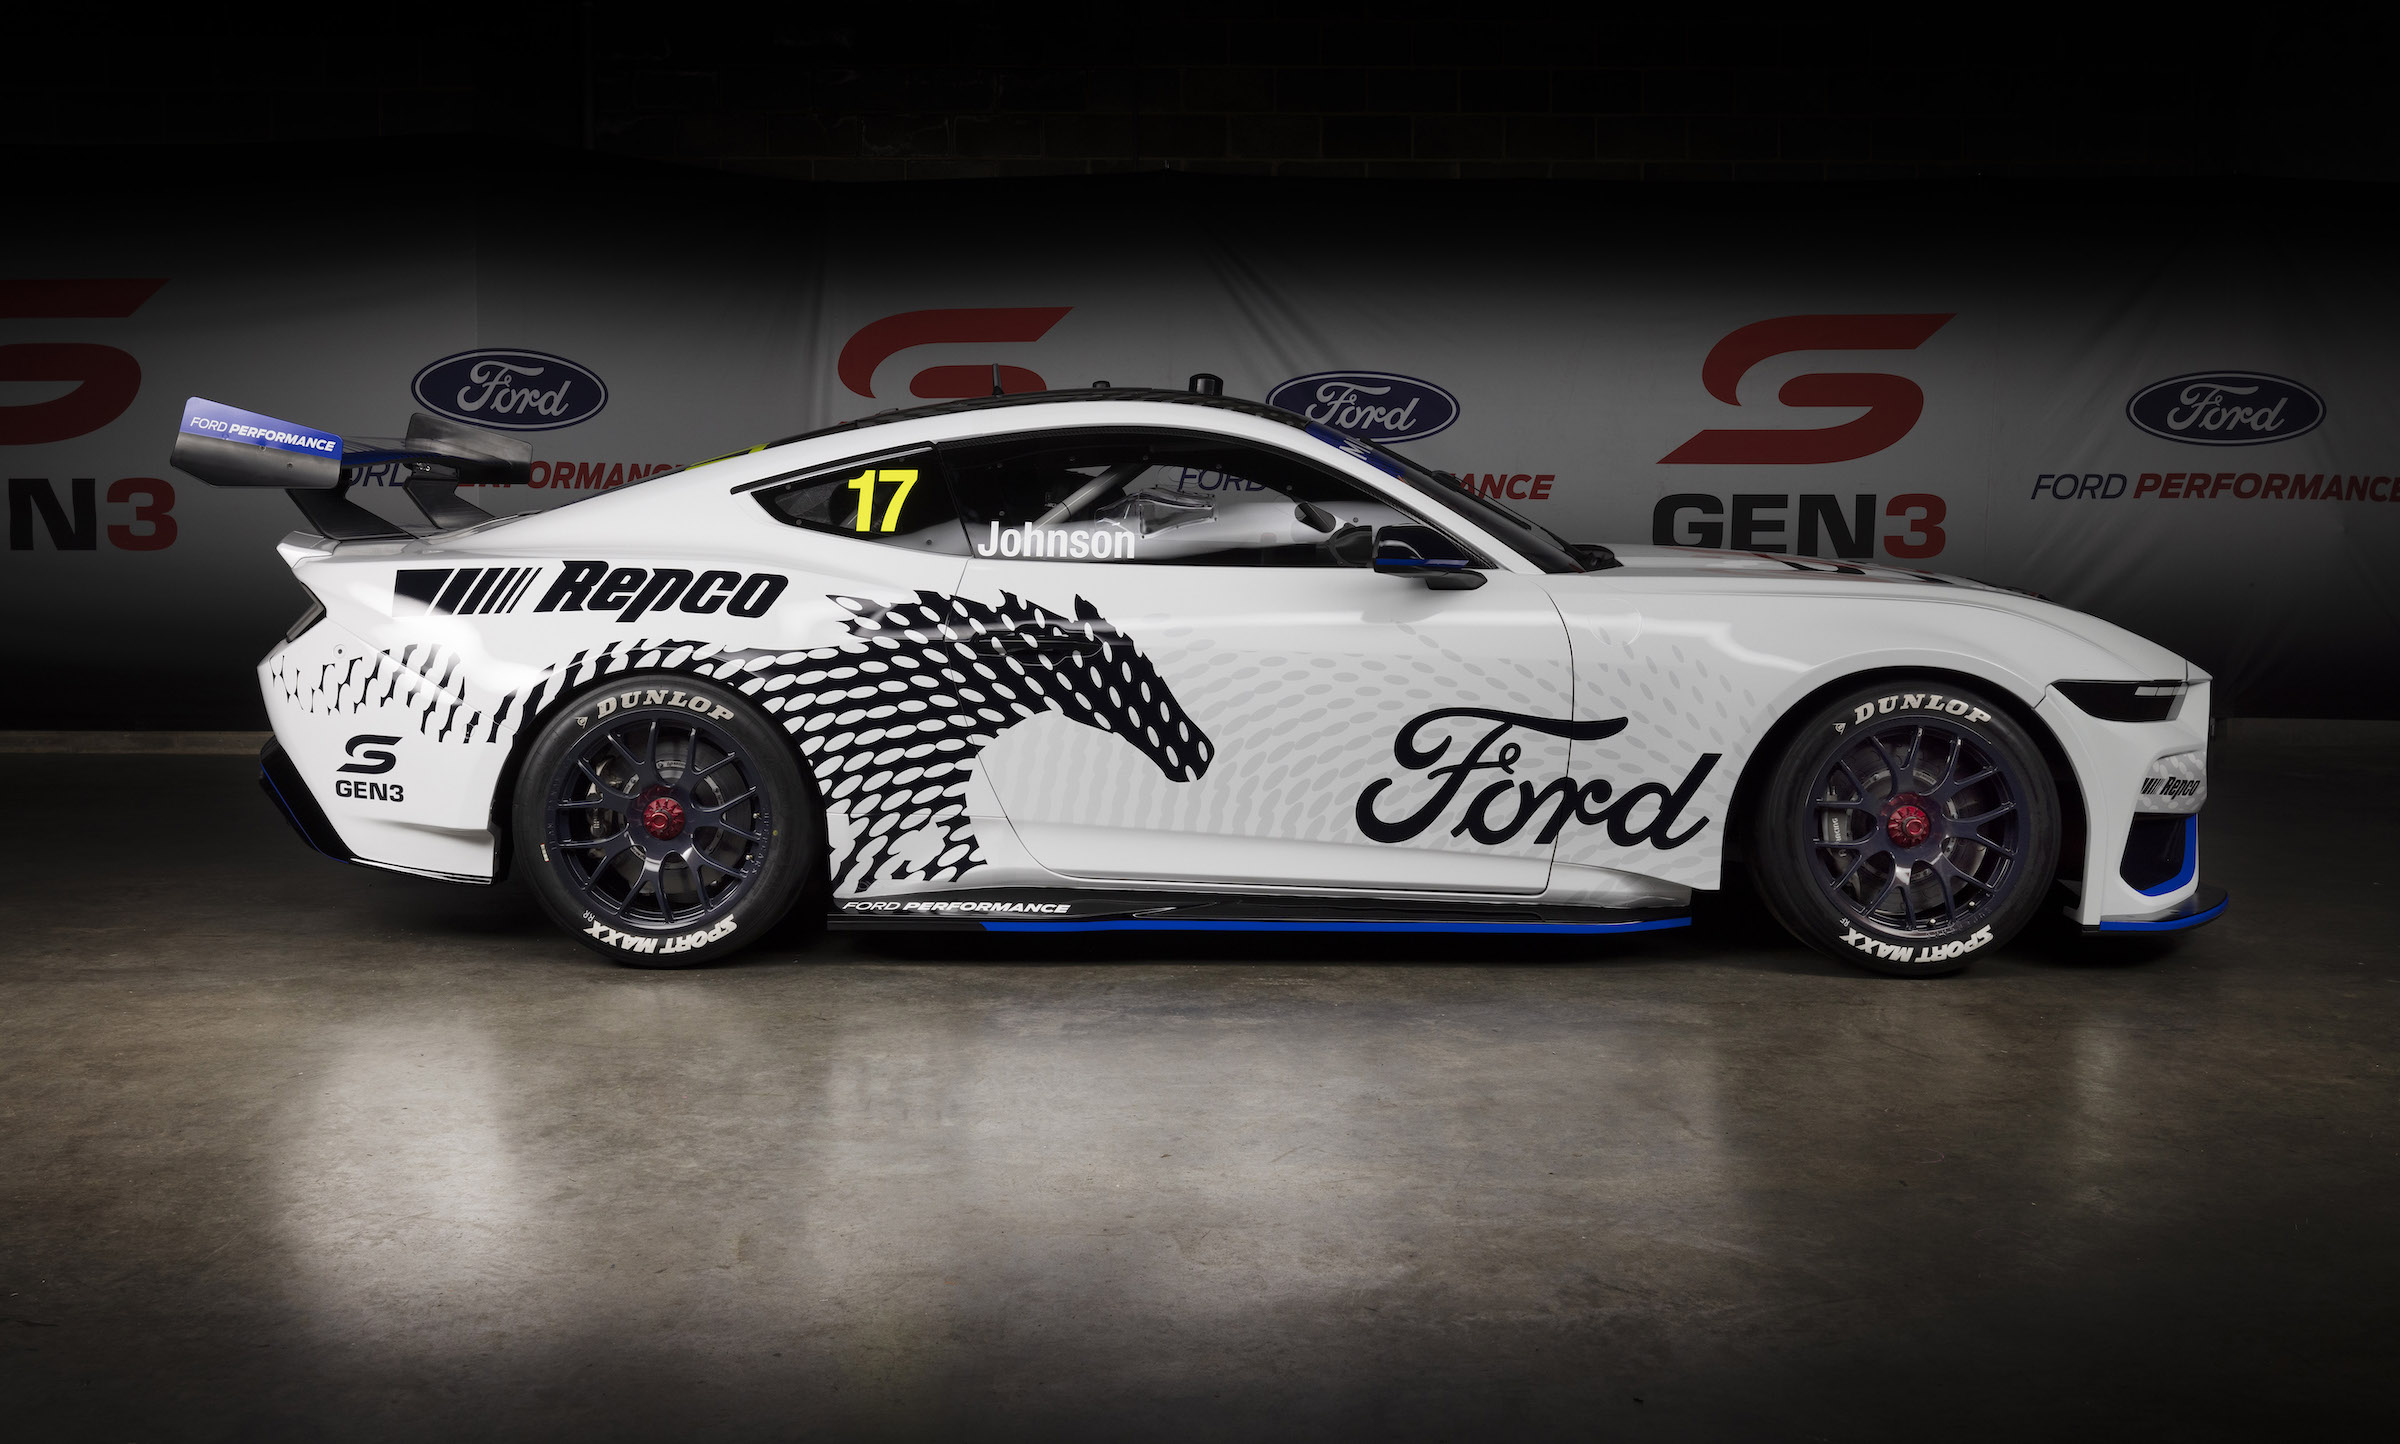 S650 Mustang All-New Ford Mustang (S650) GT Supercars Race Car Revealed at Bathurst 1000 EV-11-22-1J1A0627